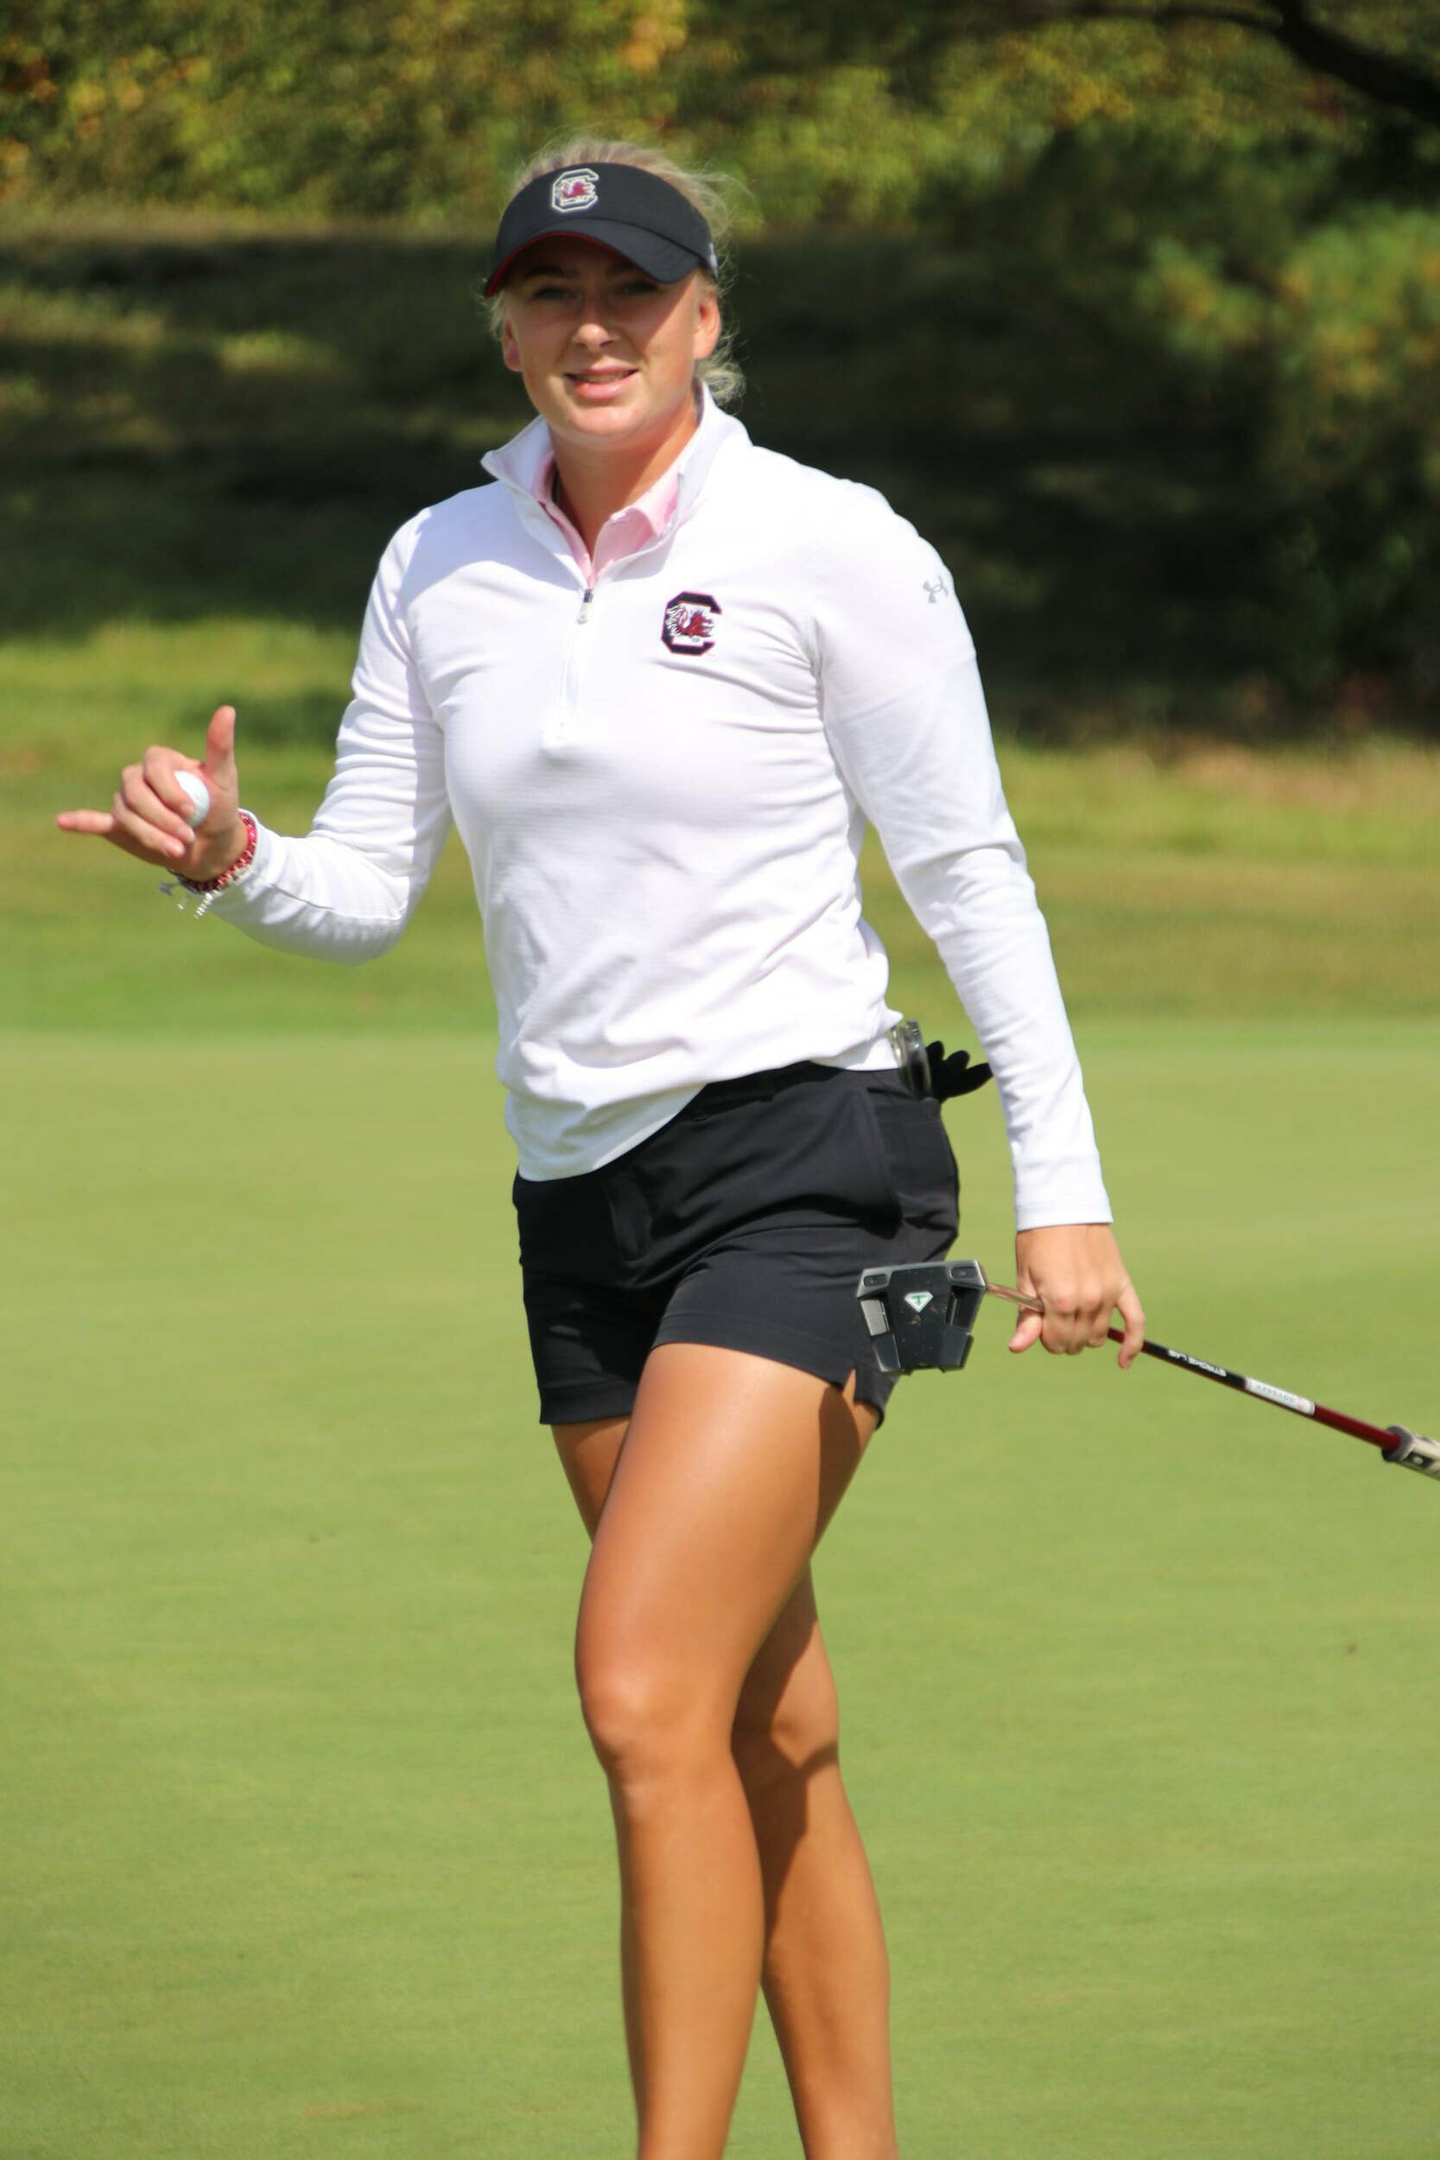 No. 6 Gamecocks, Rydqvist One Shot Off Lead at San Diego State Classic